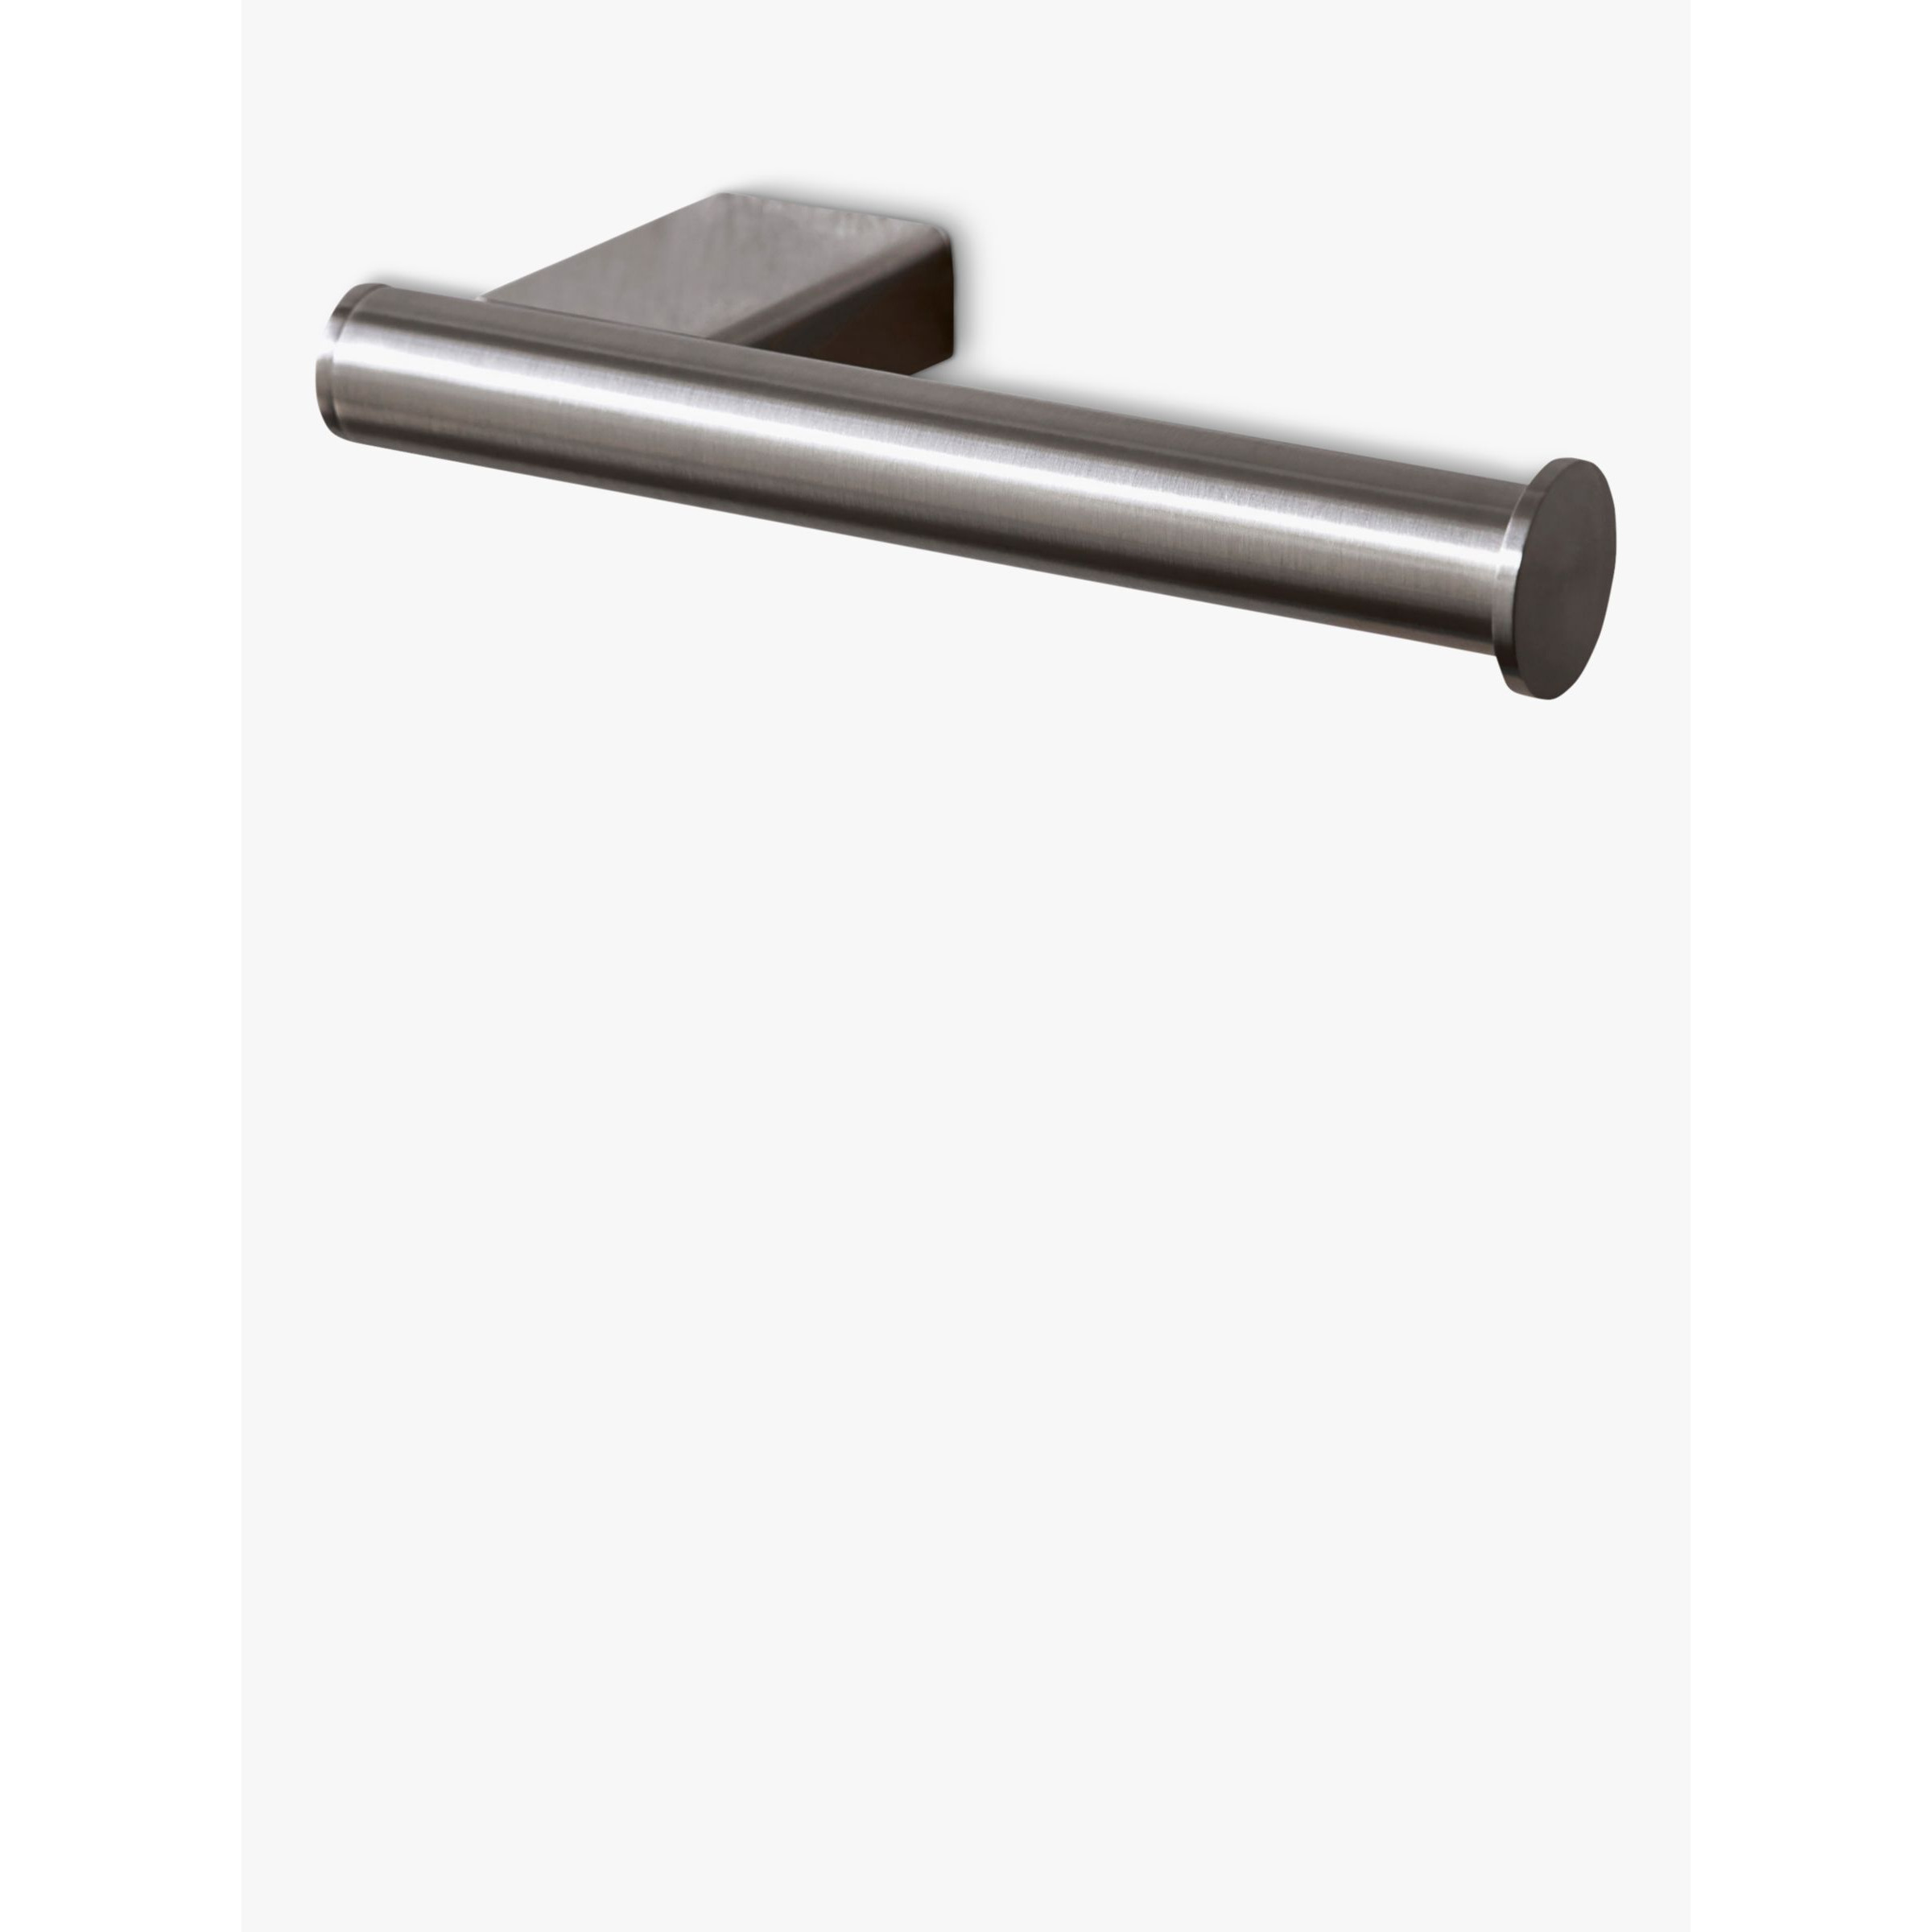 Miller Miami Spare Toilet Roll Holder, Stainless Steel - image 1